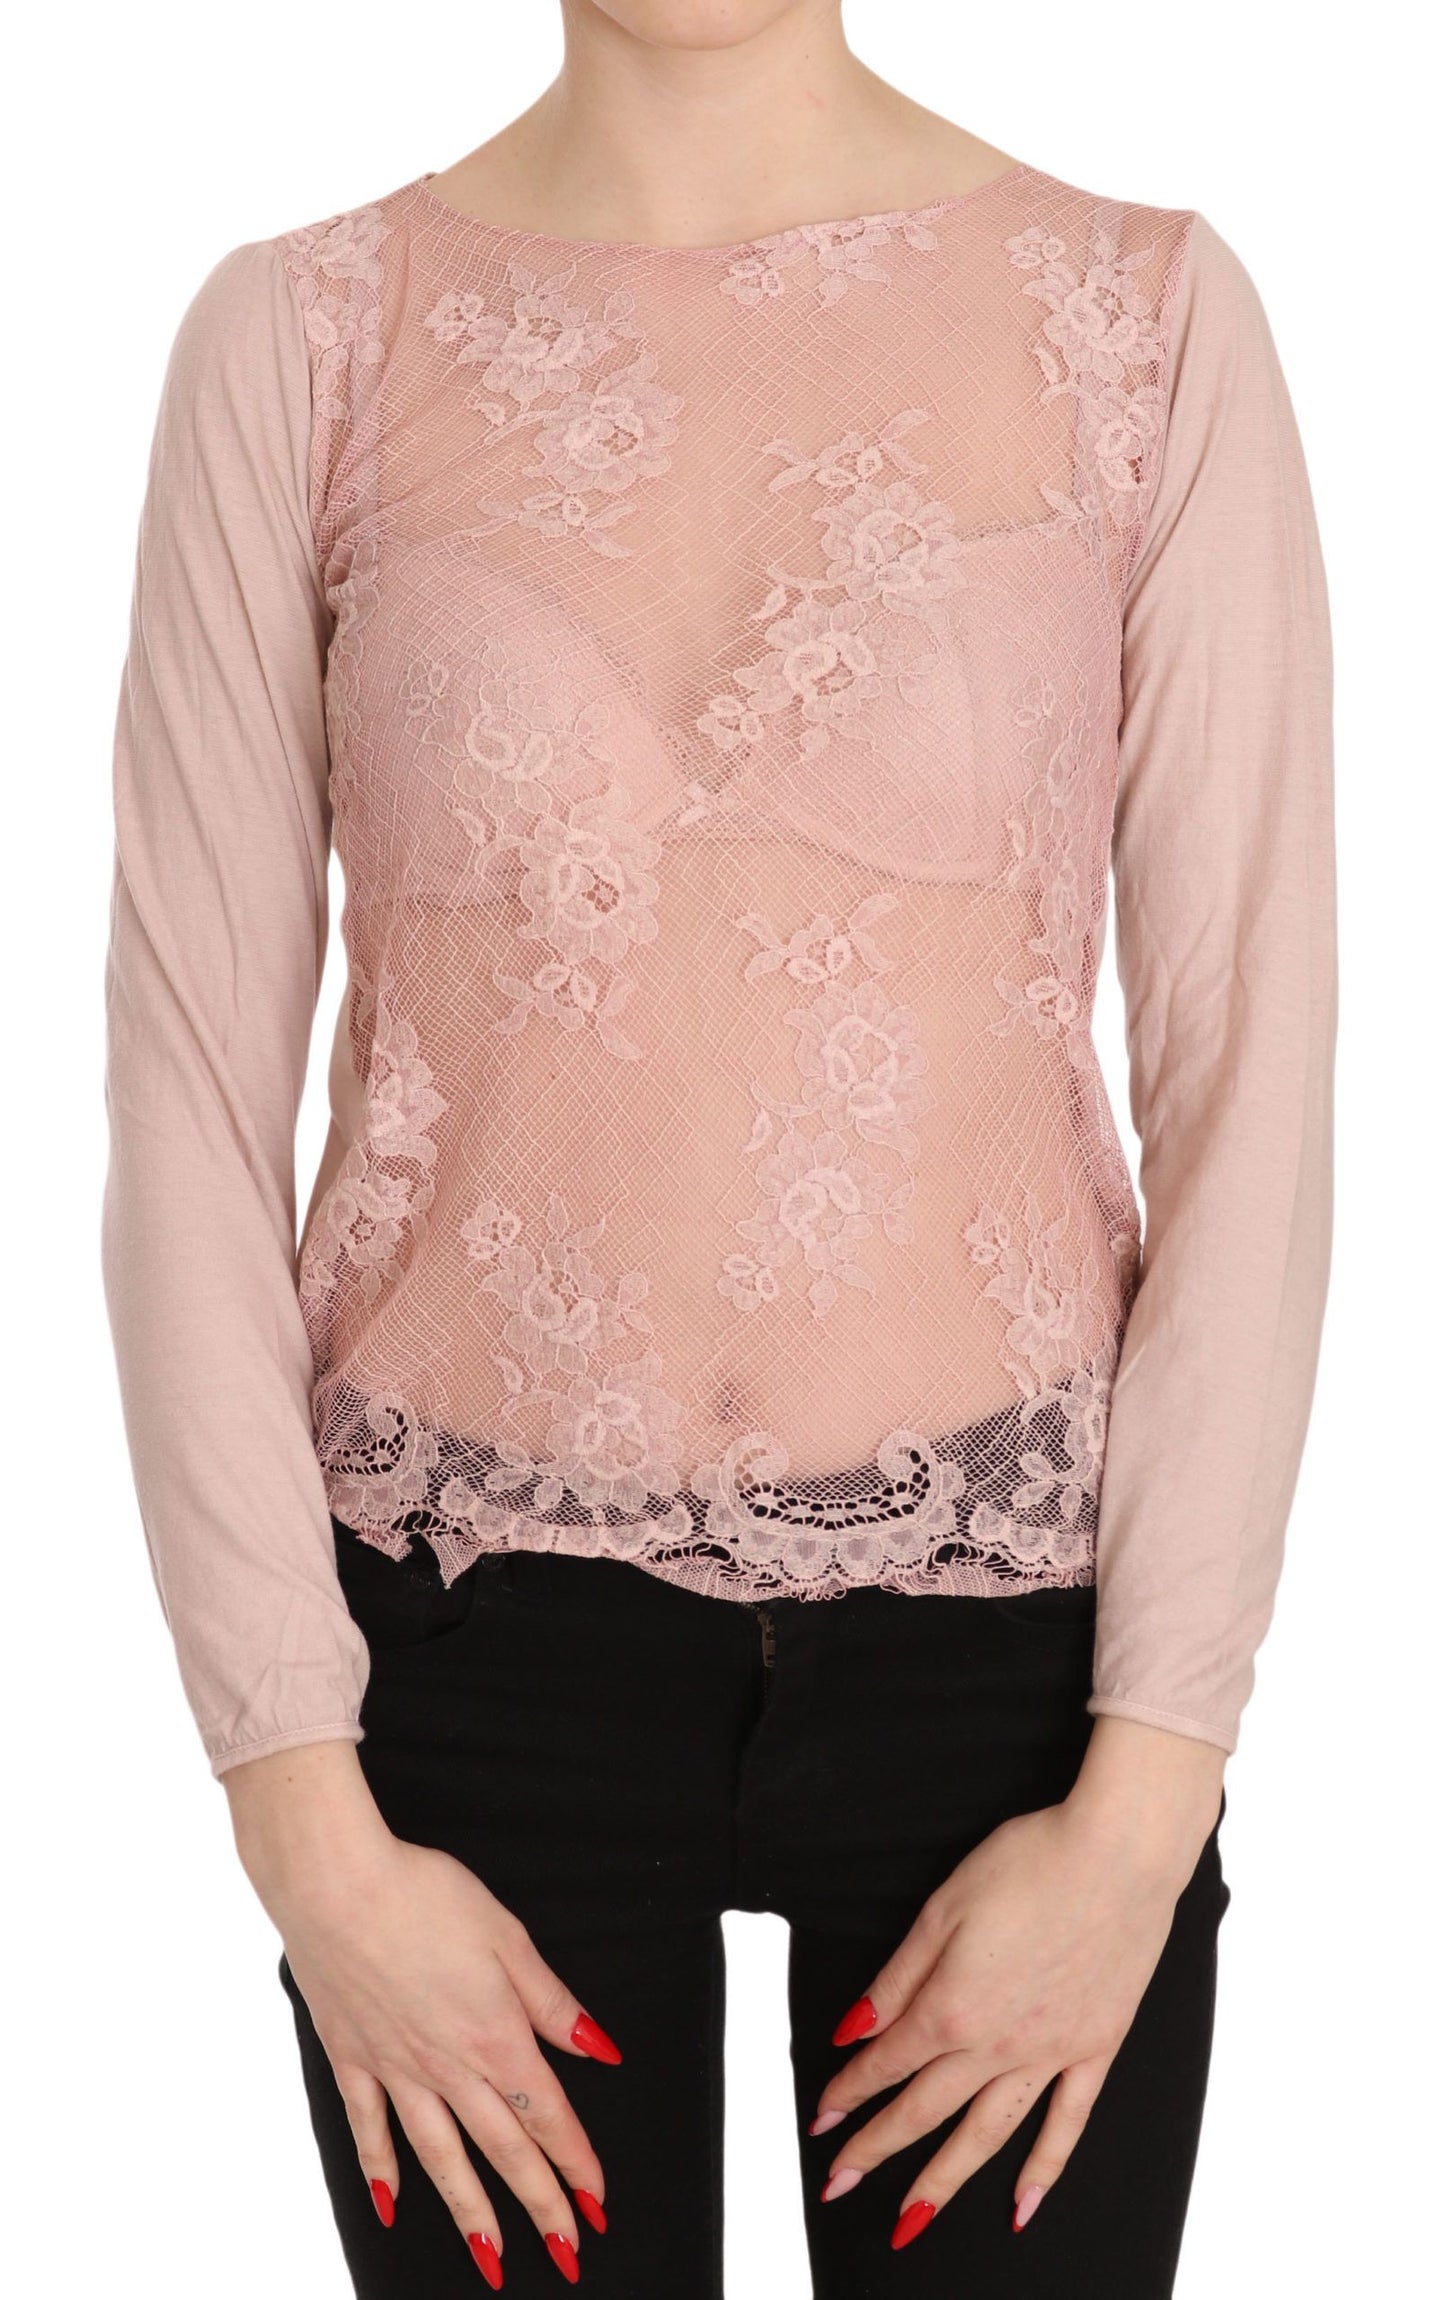 PINK MEMORIES Pink Lace See Through Long Sleeve Top Blouse